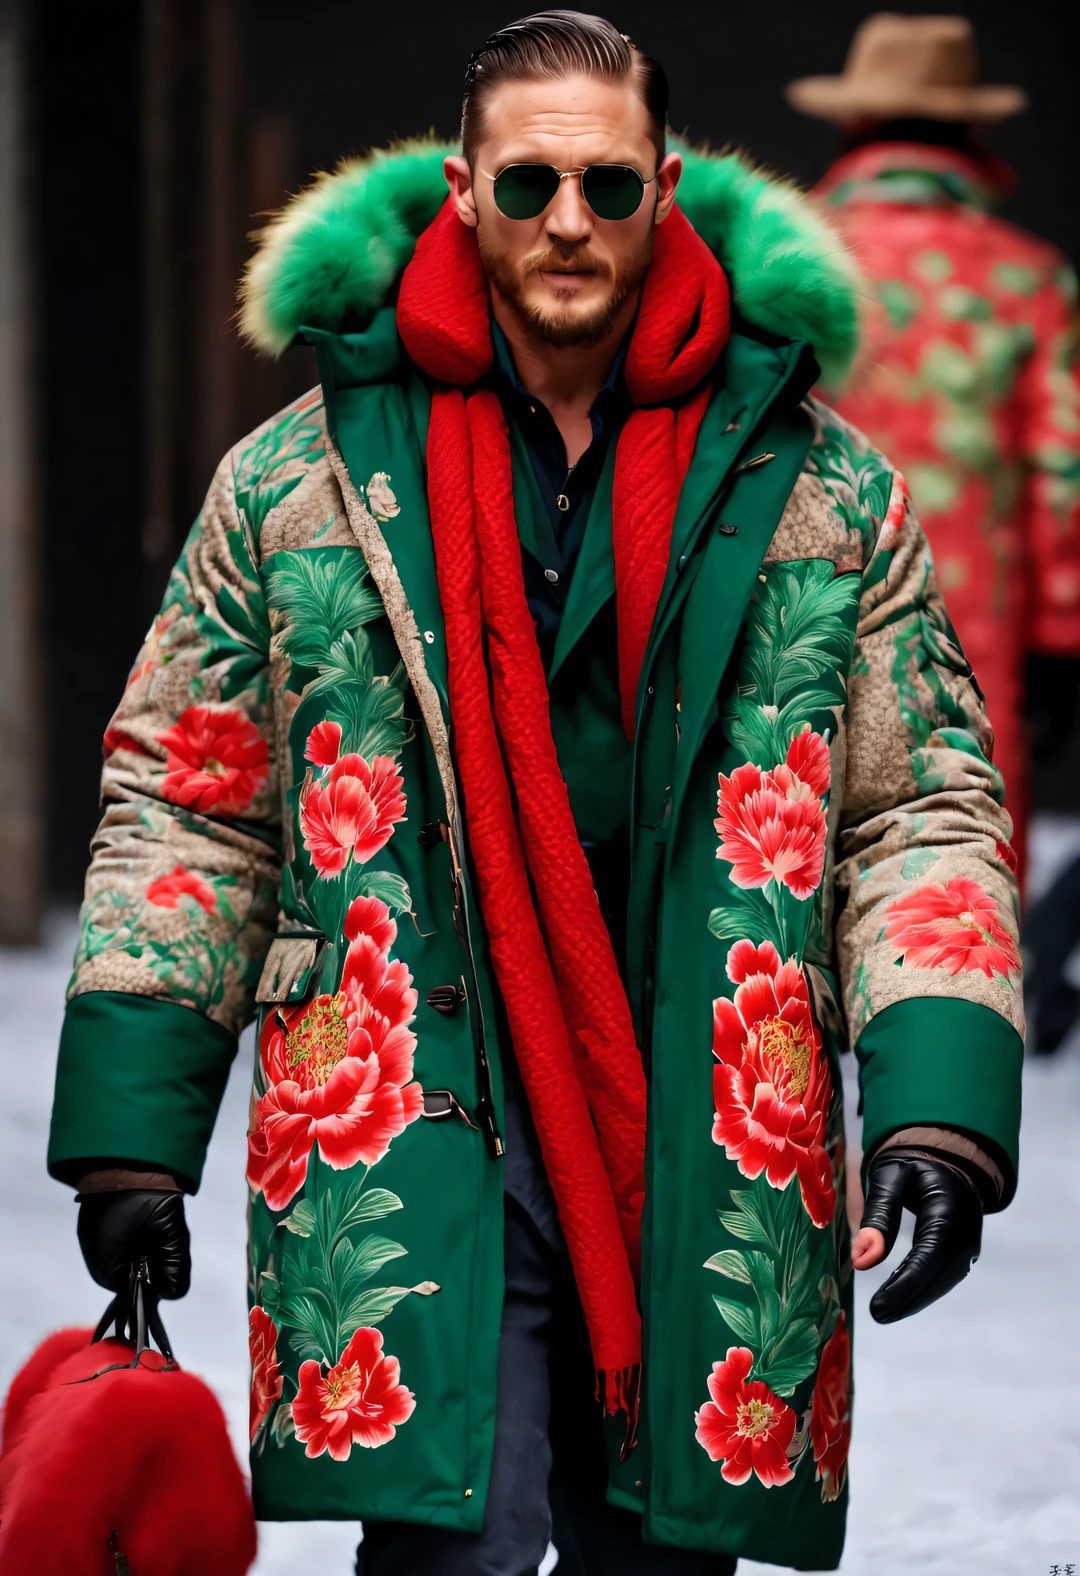 Playful new fashion style, A tall and handsome male model, Tom Hardy, wore a cotton coat made of thick red and green peony coarse fabric: 1.34), a cotton coat with warm and windproof functions, peony flower, Leaves, embroidery, With big red and green peony pattern as the theme, (tawny fur coat collar), tibetan shaman jewelry, complex patterns,
Embroidered Suzhou embroidery bright red parka snow coat, (exceed) coat, Black Sweater, jeans, winter scarf warm scarf, duckbill cap, gloves gloves, belt, Cotton boots, sunglasses, Combat boots, sports shoes, big photography, whole body,
background: Indoor T runway, T runway, (snowing), snow,